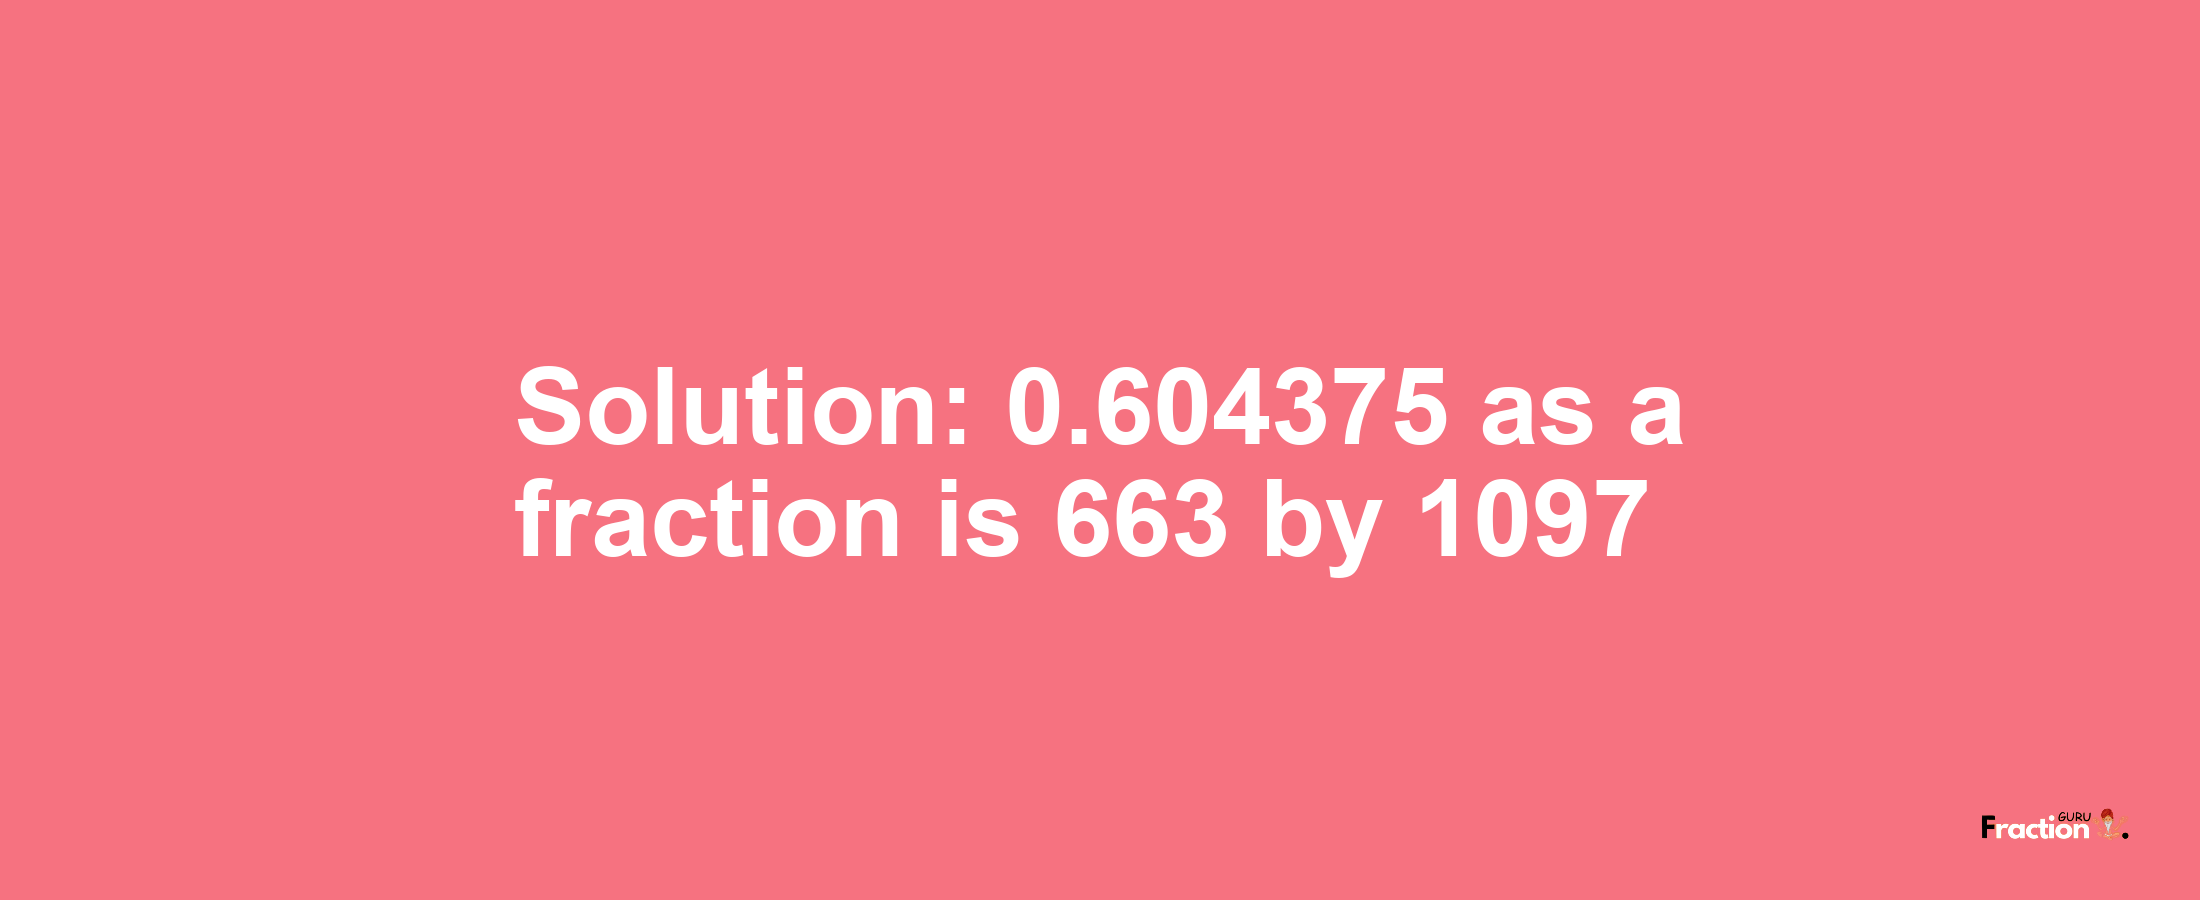 Solution:0.604375 as a fraction is 663/1097